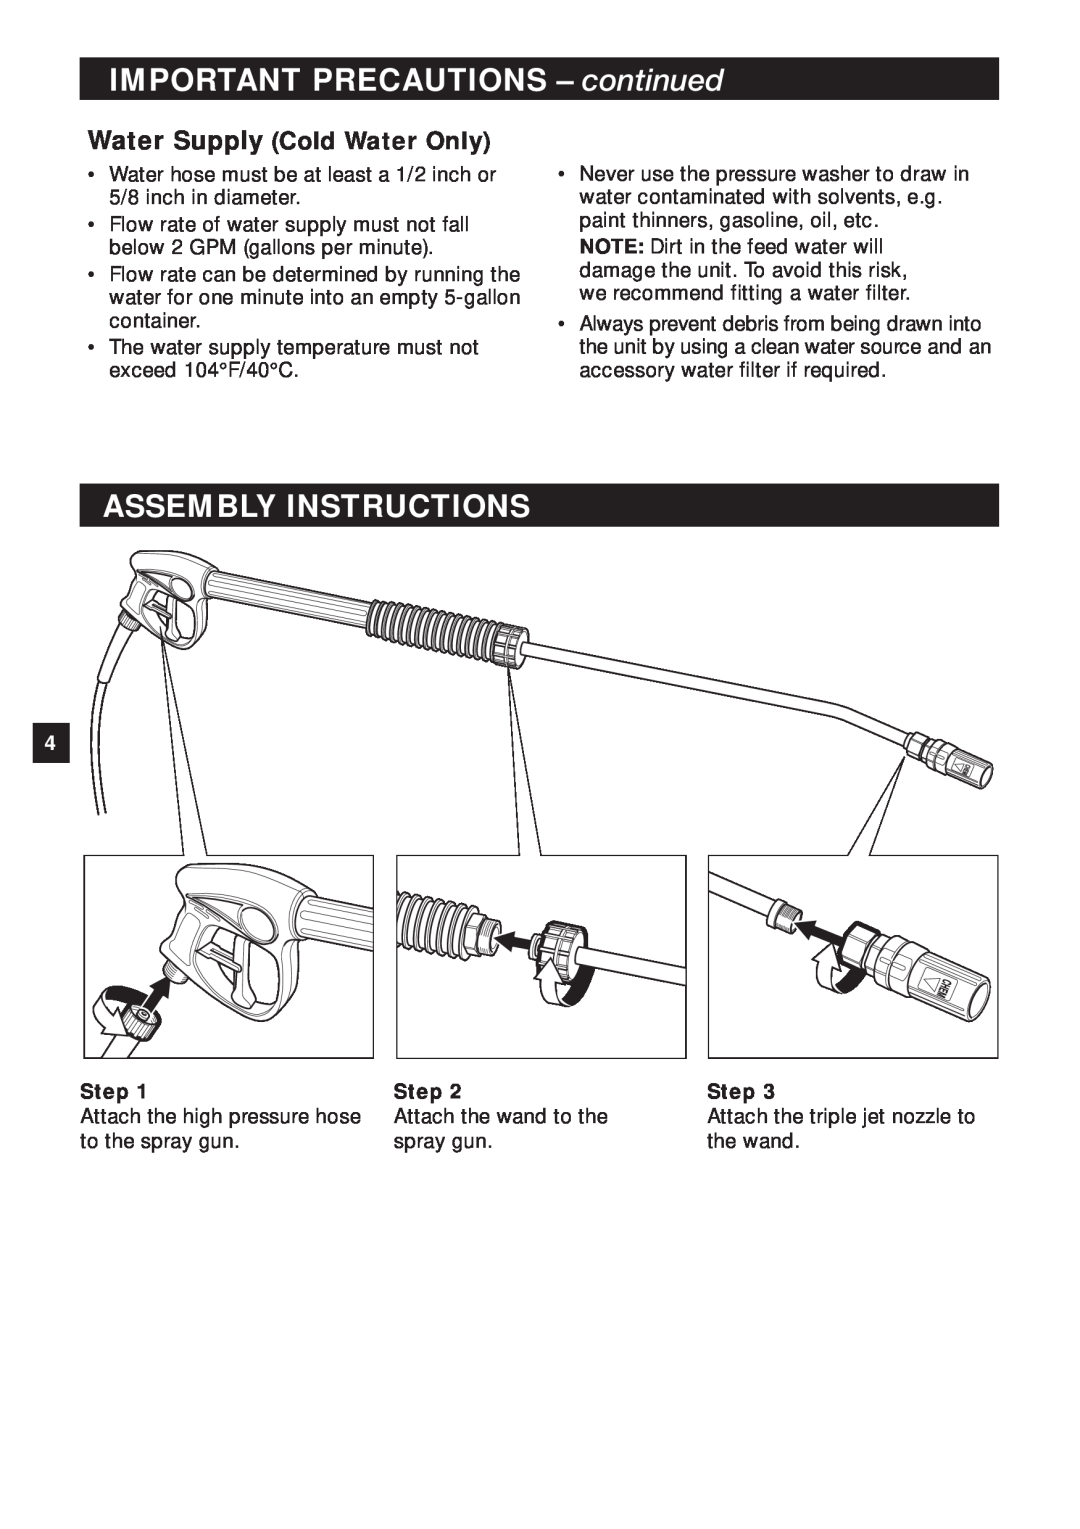 Karcher HD 425 specifications IMPORTANT PRECAUTIONS - continued, Assembly Instructions, Water Supply Cold Water Only, Step 